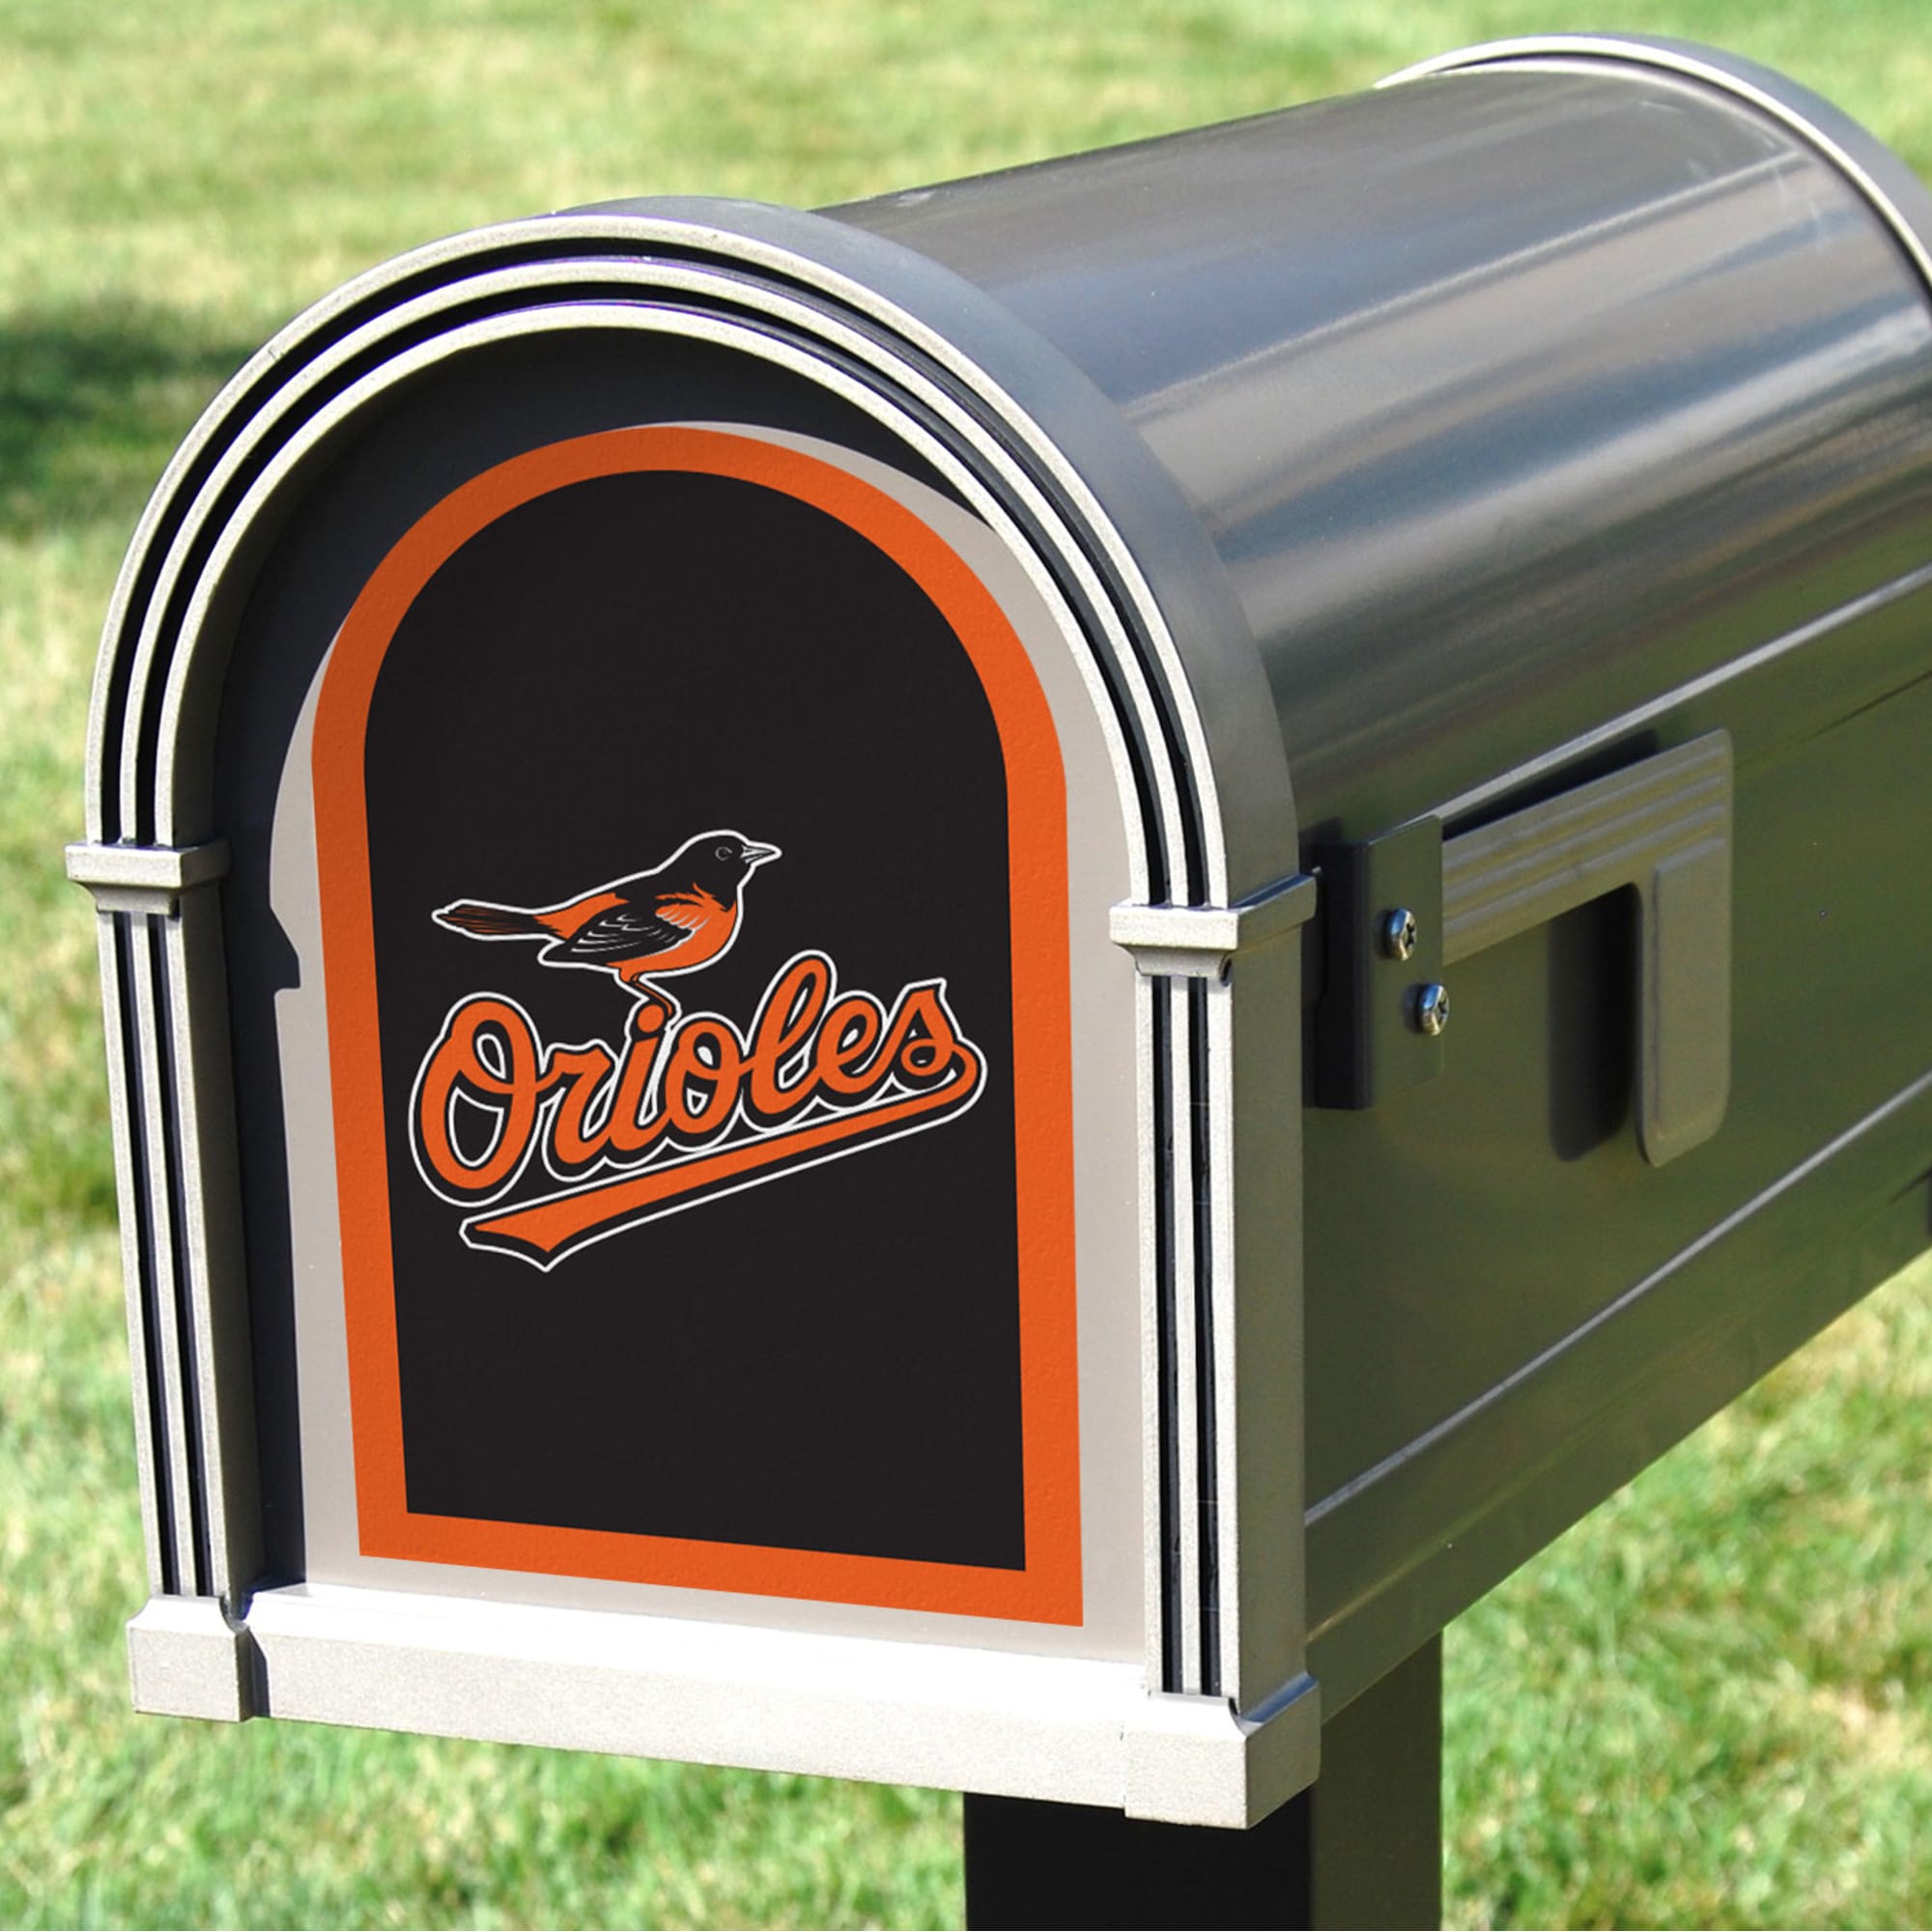 Baltimore Orioles: Mailbox Logo - Officially Licensed MLB Outdoor Graphic 5.0"W x 8.0"H by Fathead | Wood/Aluminum